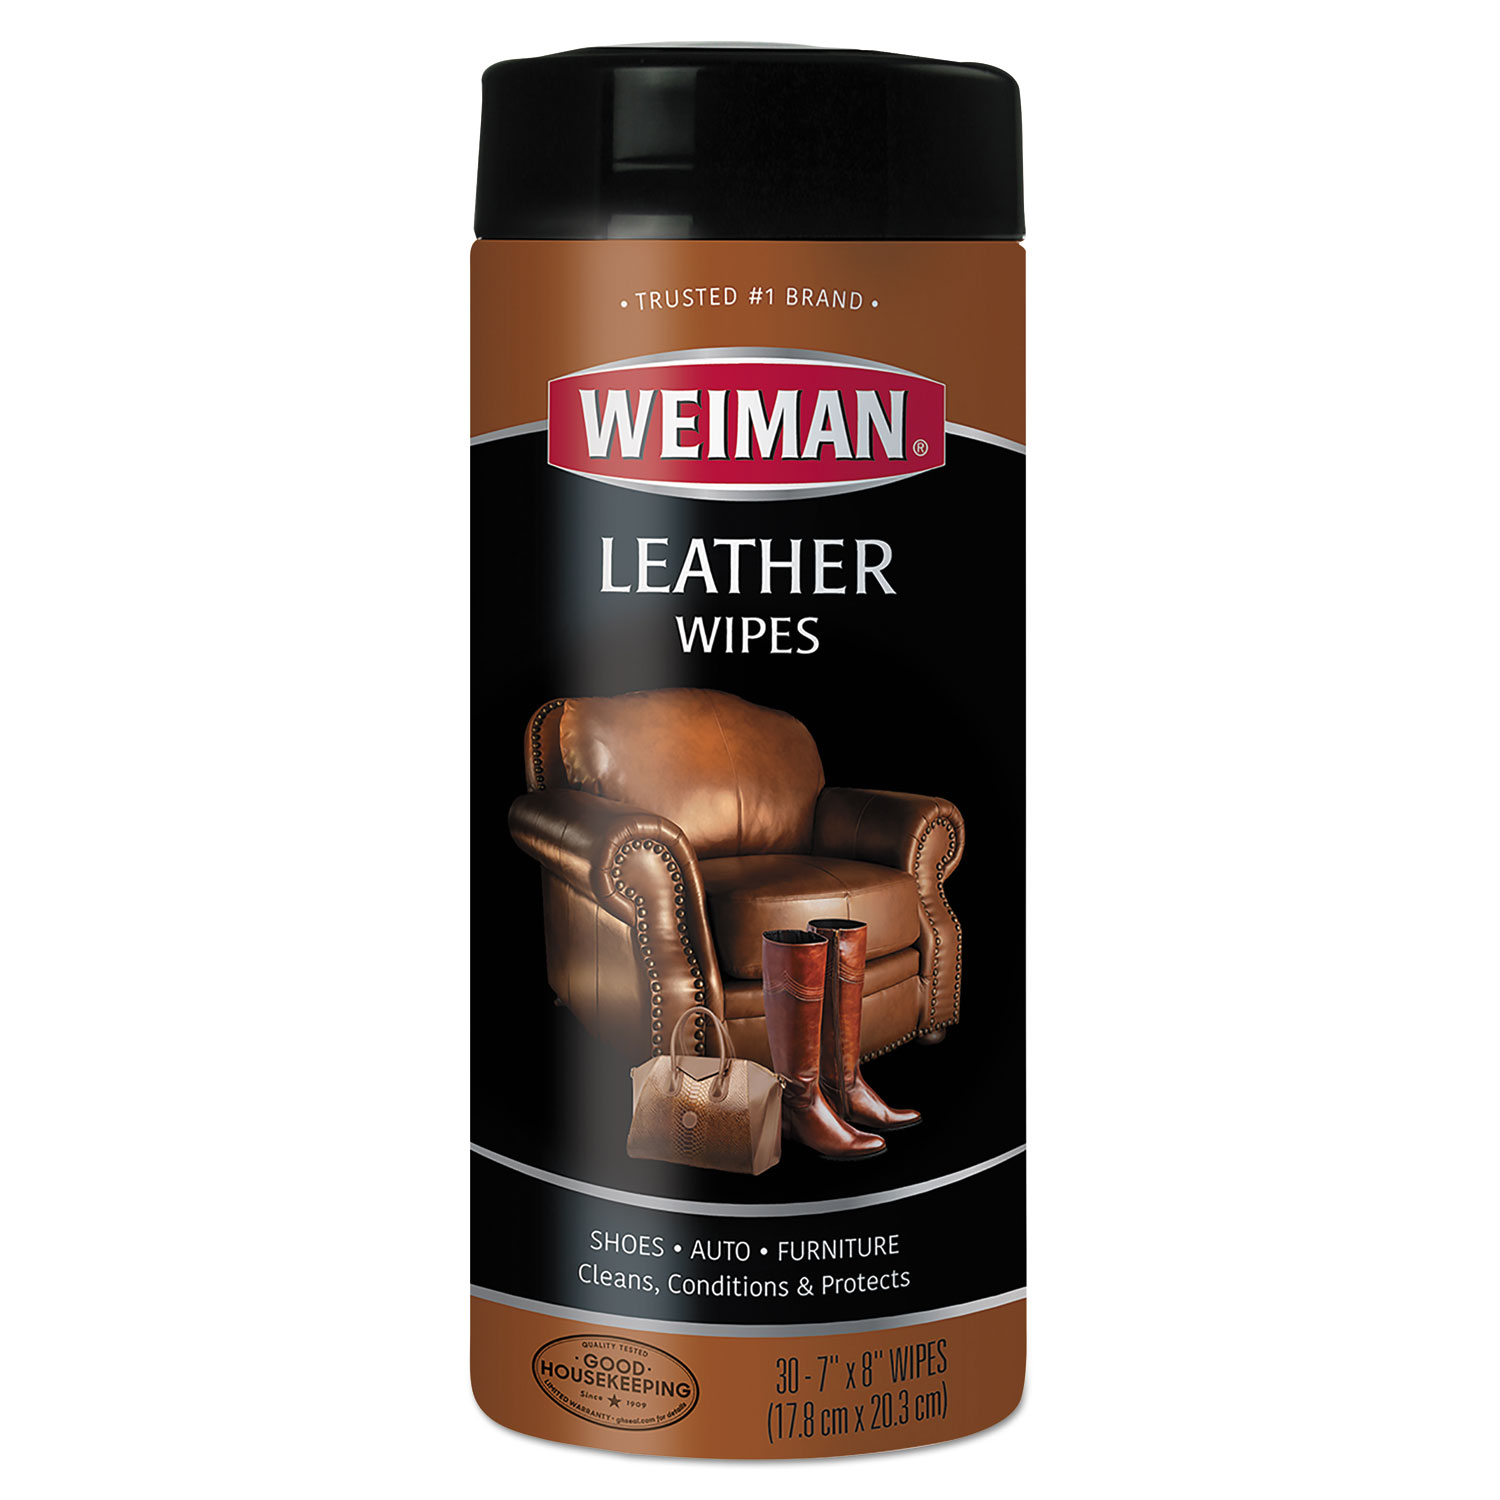  WEIMAN 91 Leather Wipes, 7 x 8, 30/Canister (WMN91) 